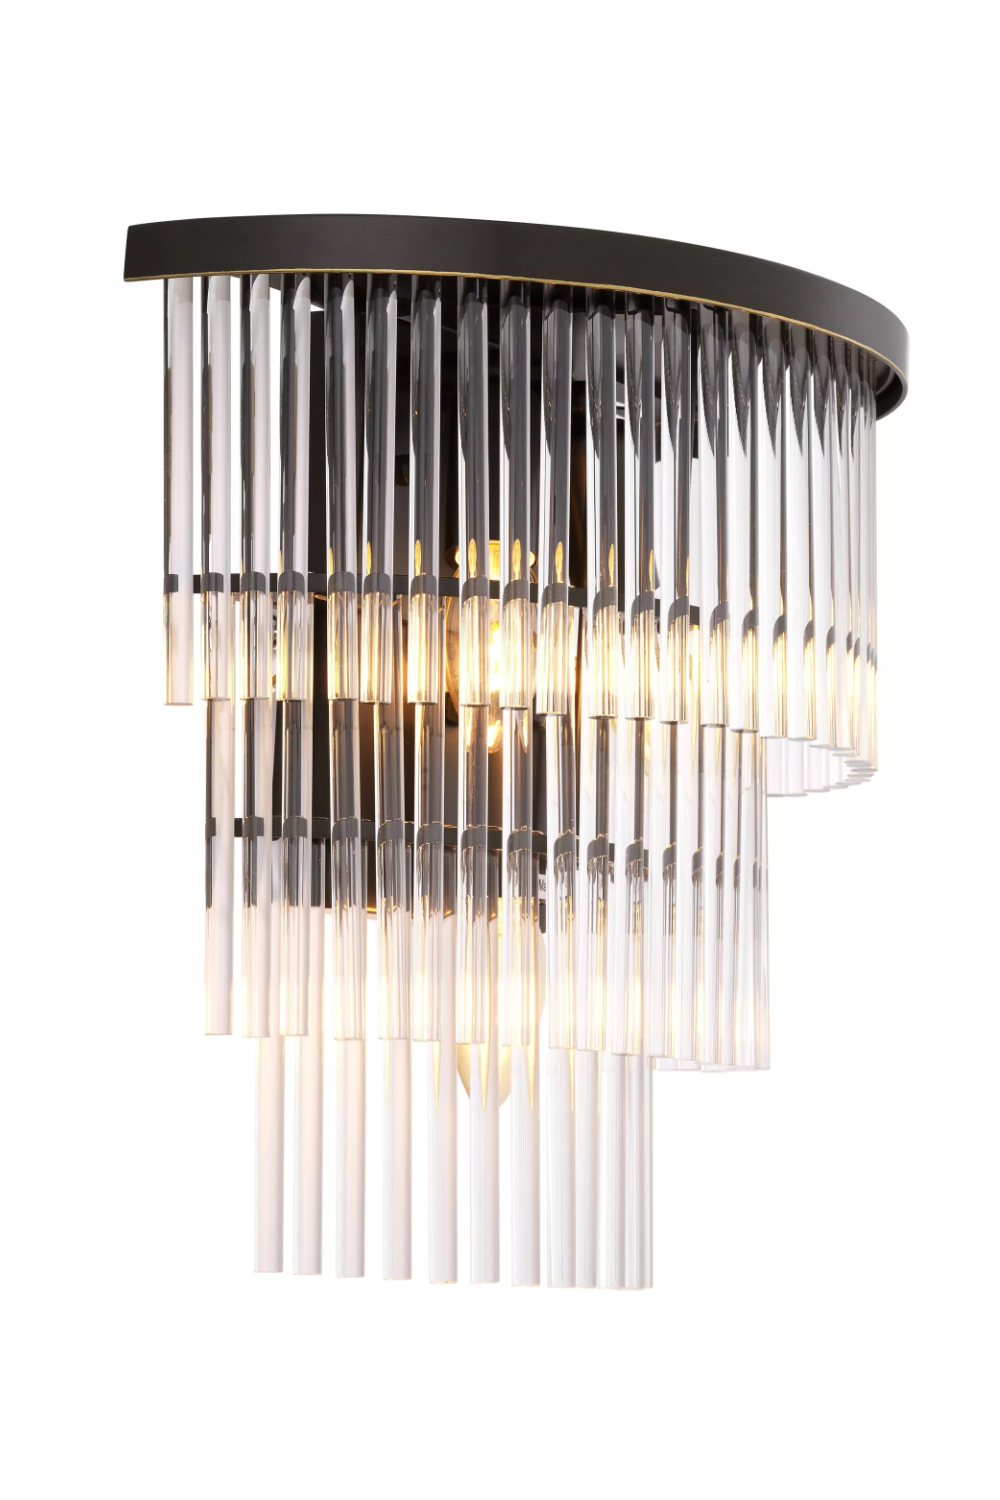 Glass Rods Wall Lamp | Eichholtz East | OROA